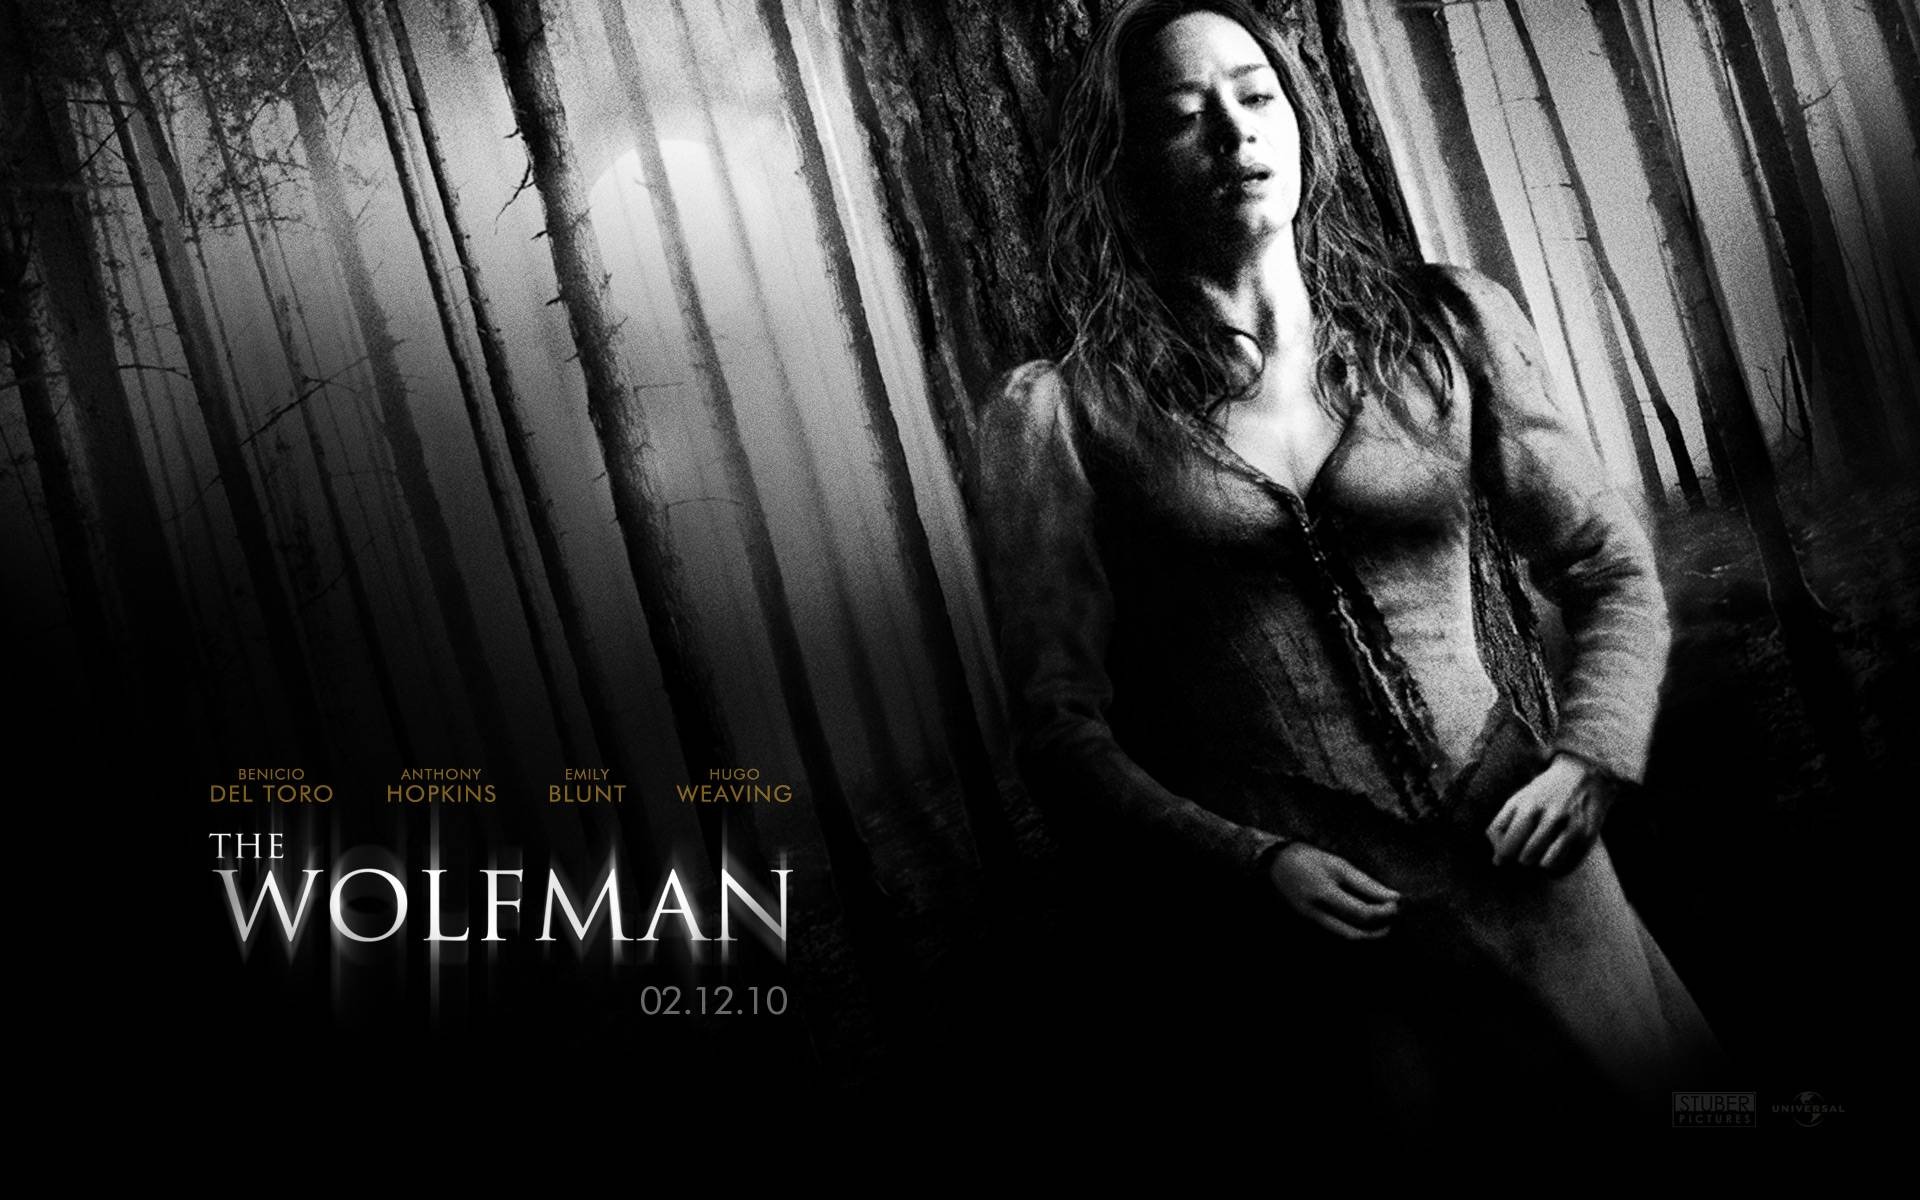 The Wolfman Movie Wallpapers #10 - 1920x1200